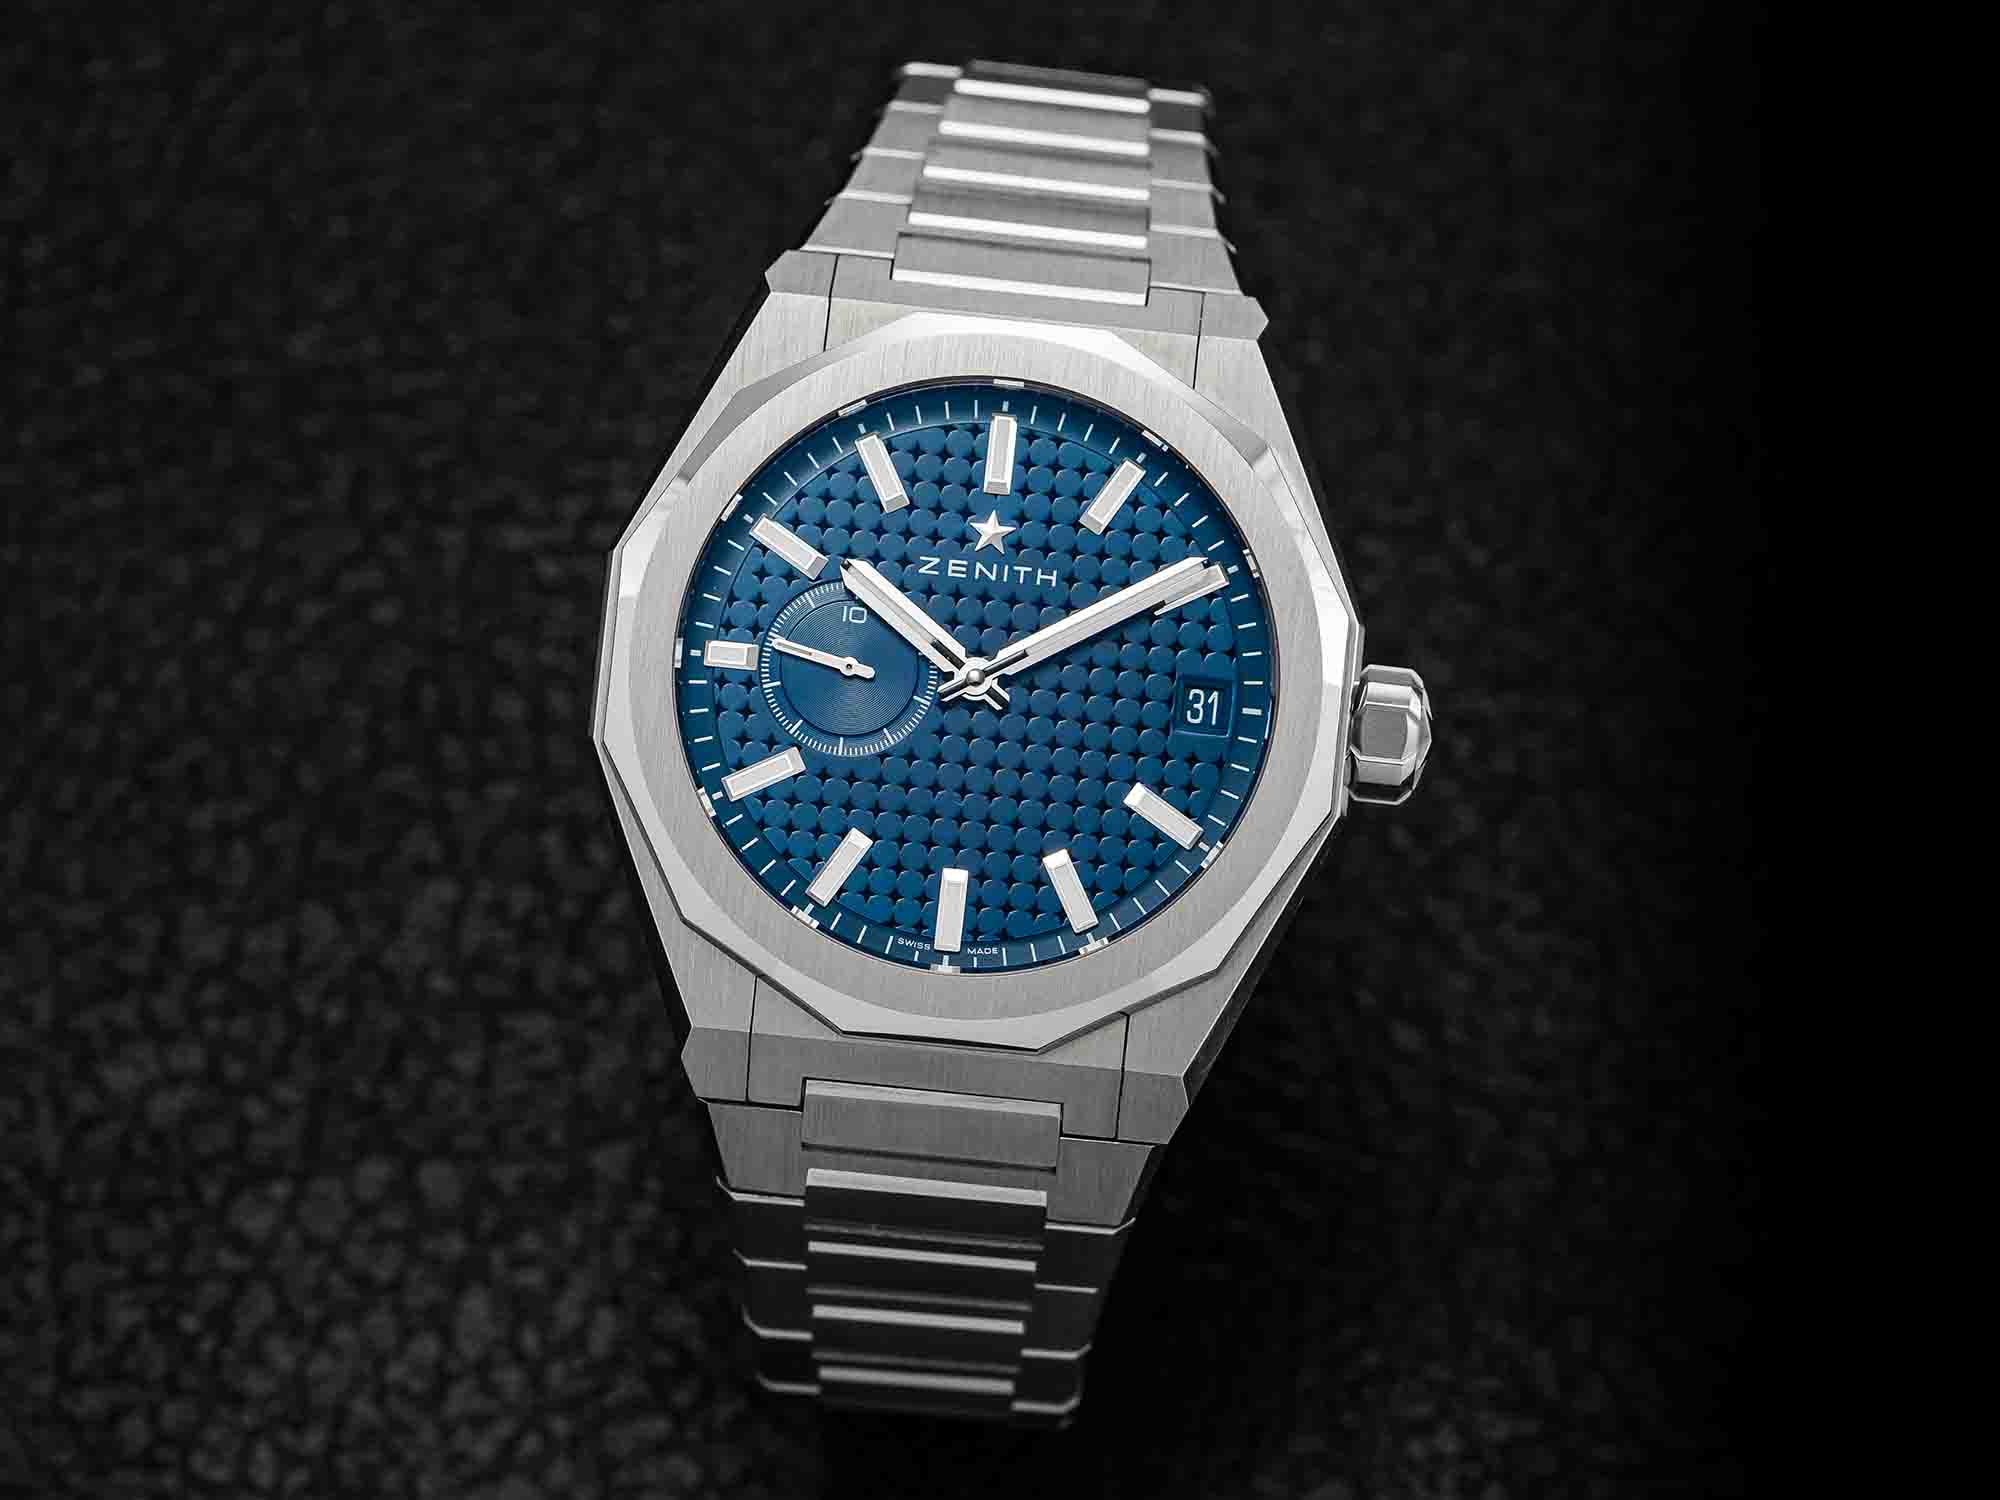 Buy Hublot Watches for Men and Women in India at Johnson Watch Co